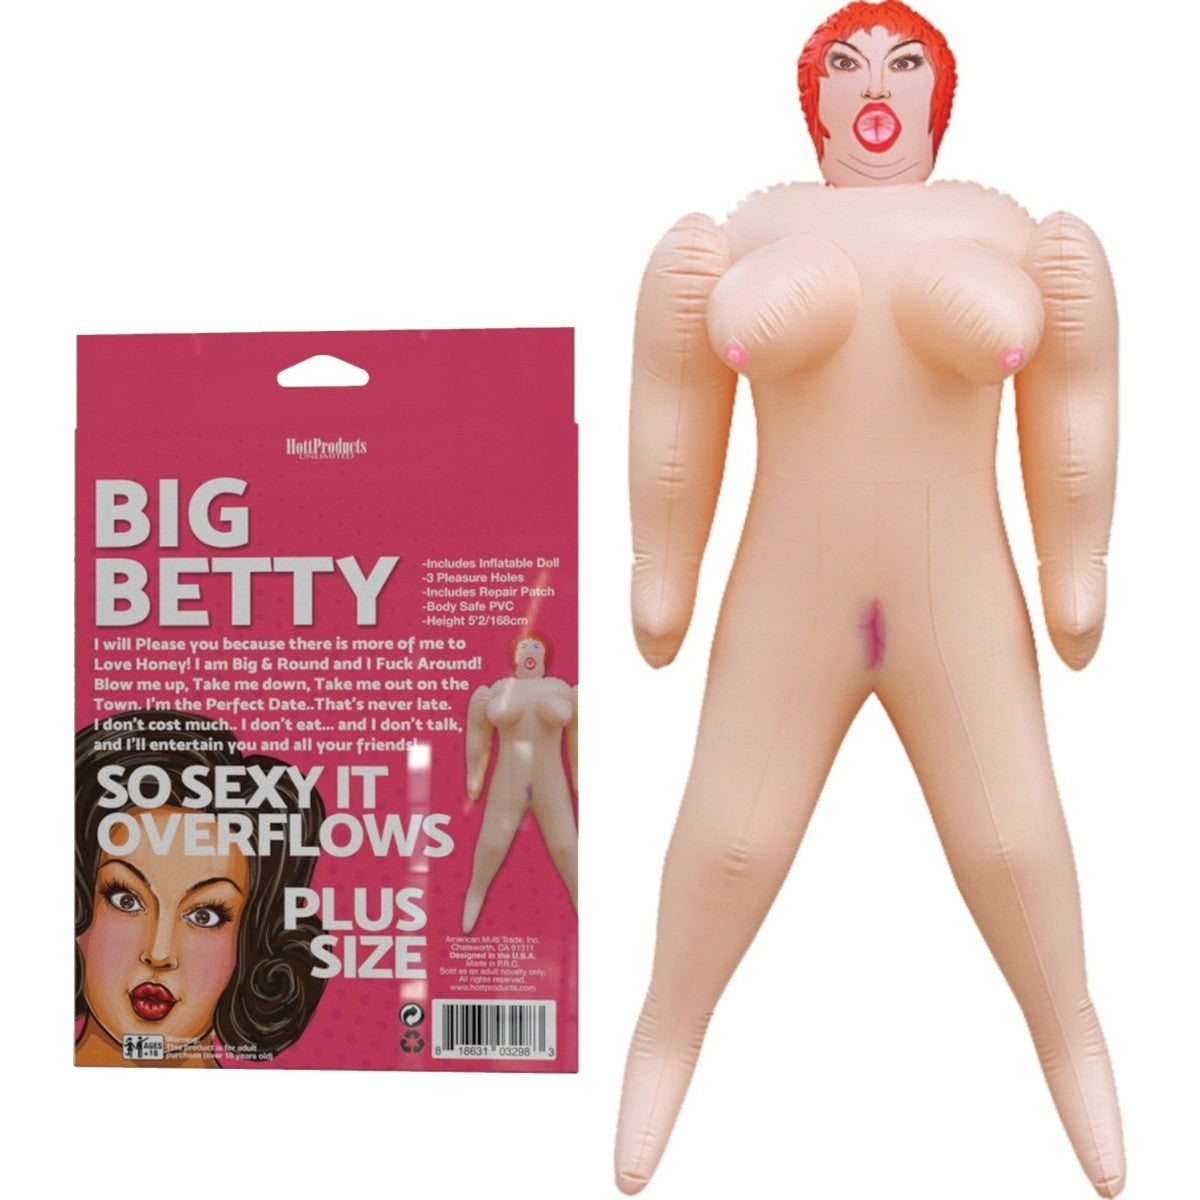 Big Betty Inflatable Love Doll Intimates Adult Boutique